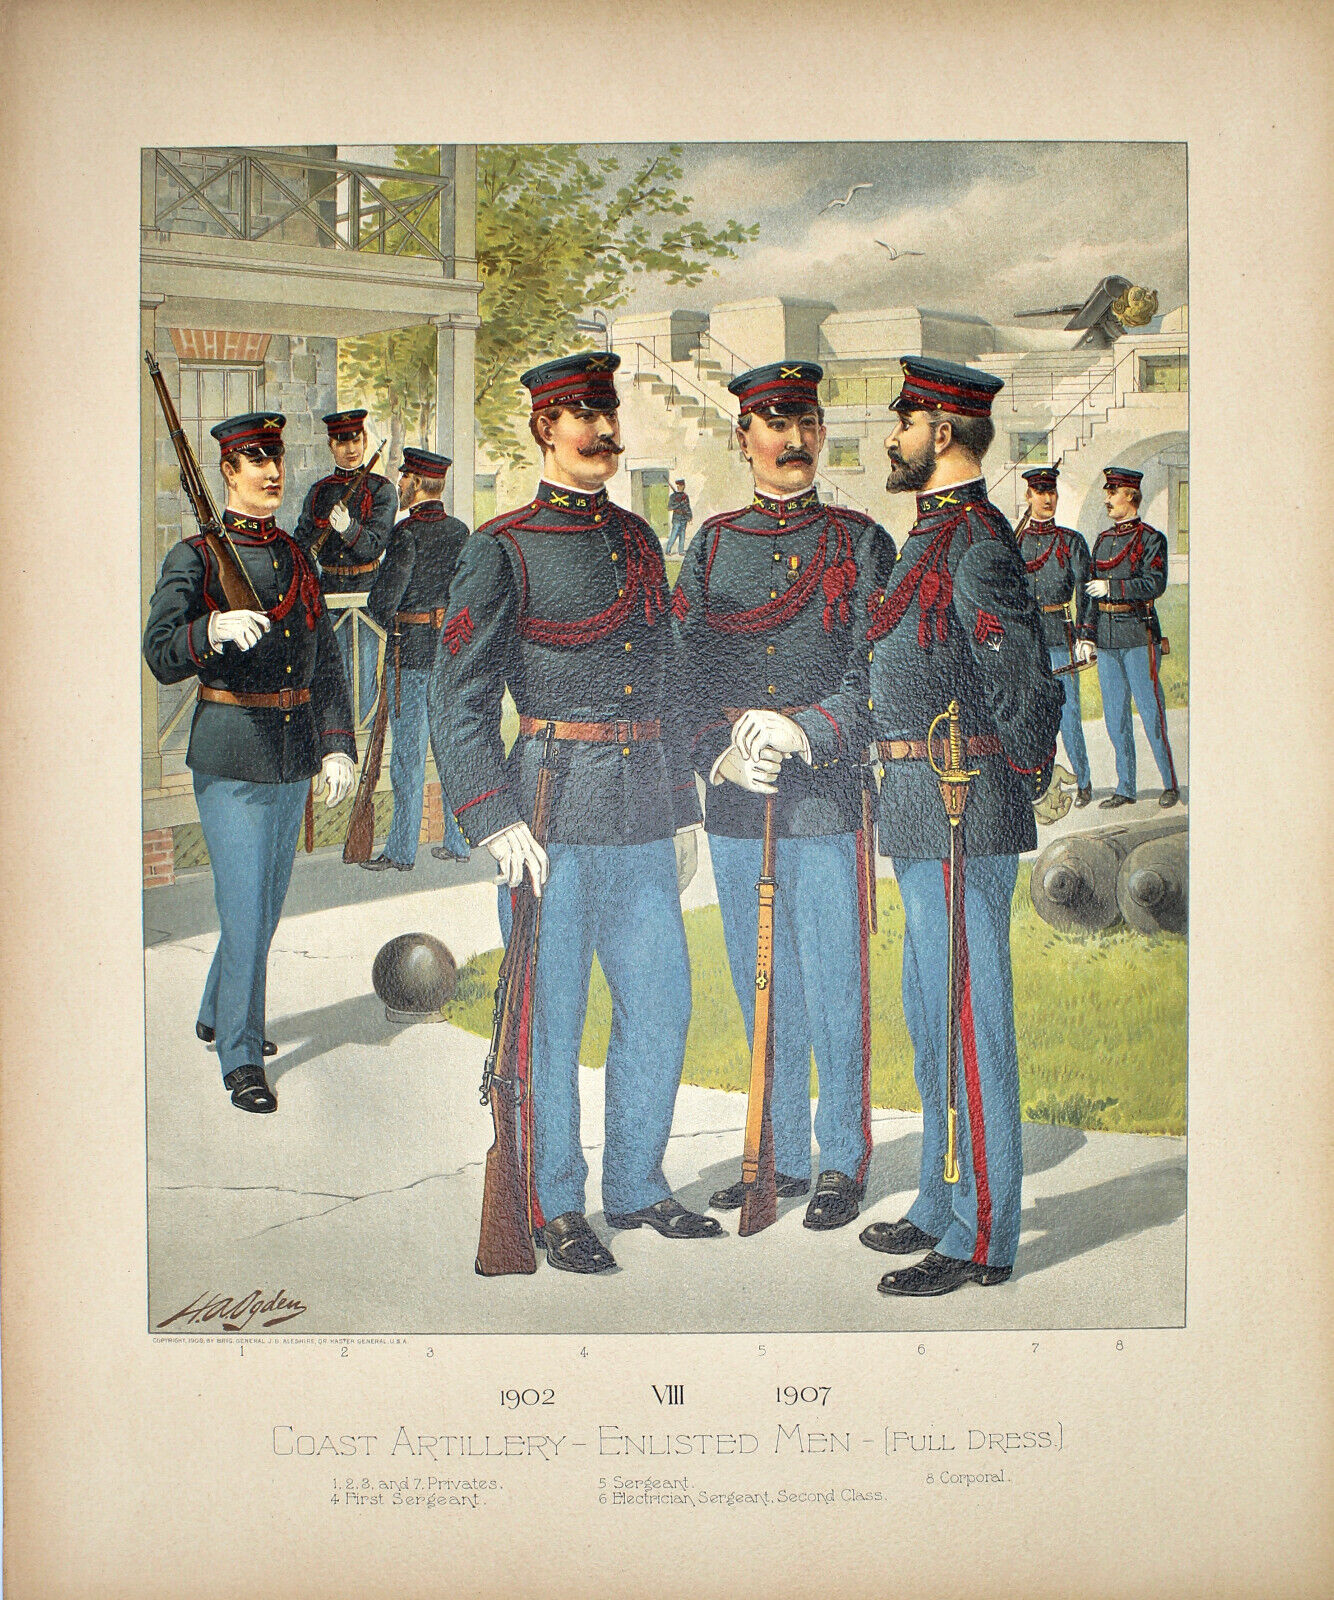 17 Antique Military Prints from "Uniform of the Army of the U.S." 1889-1907 Без бренда - фотография #3